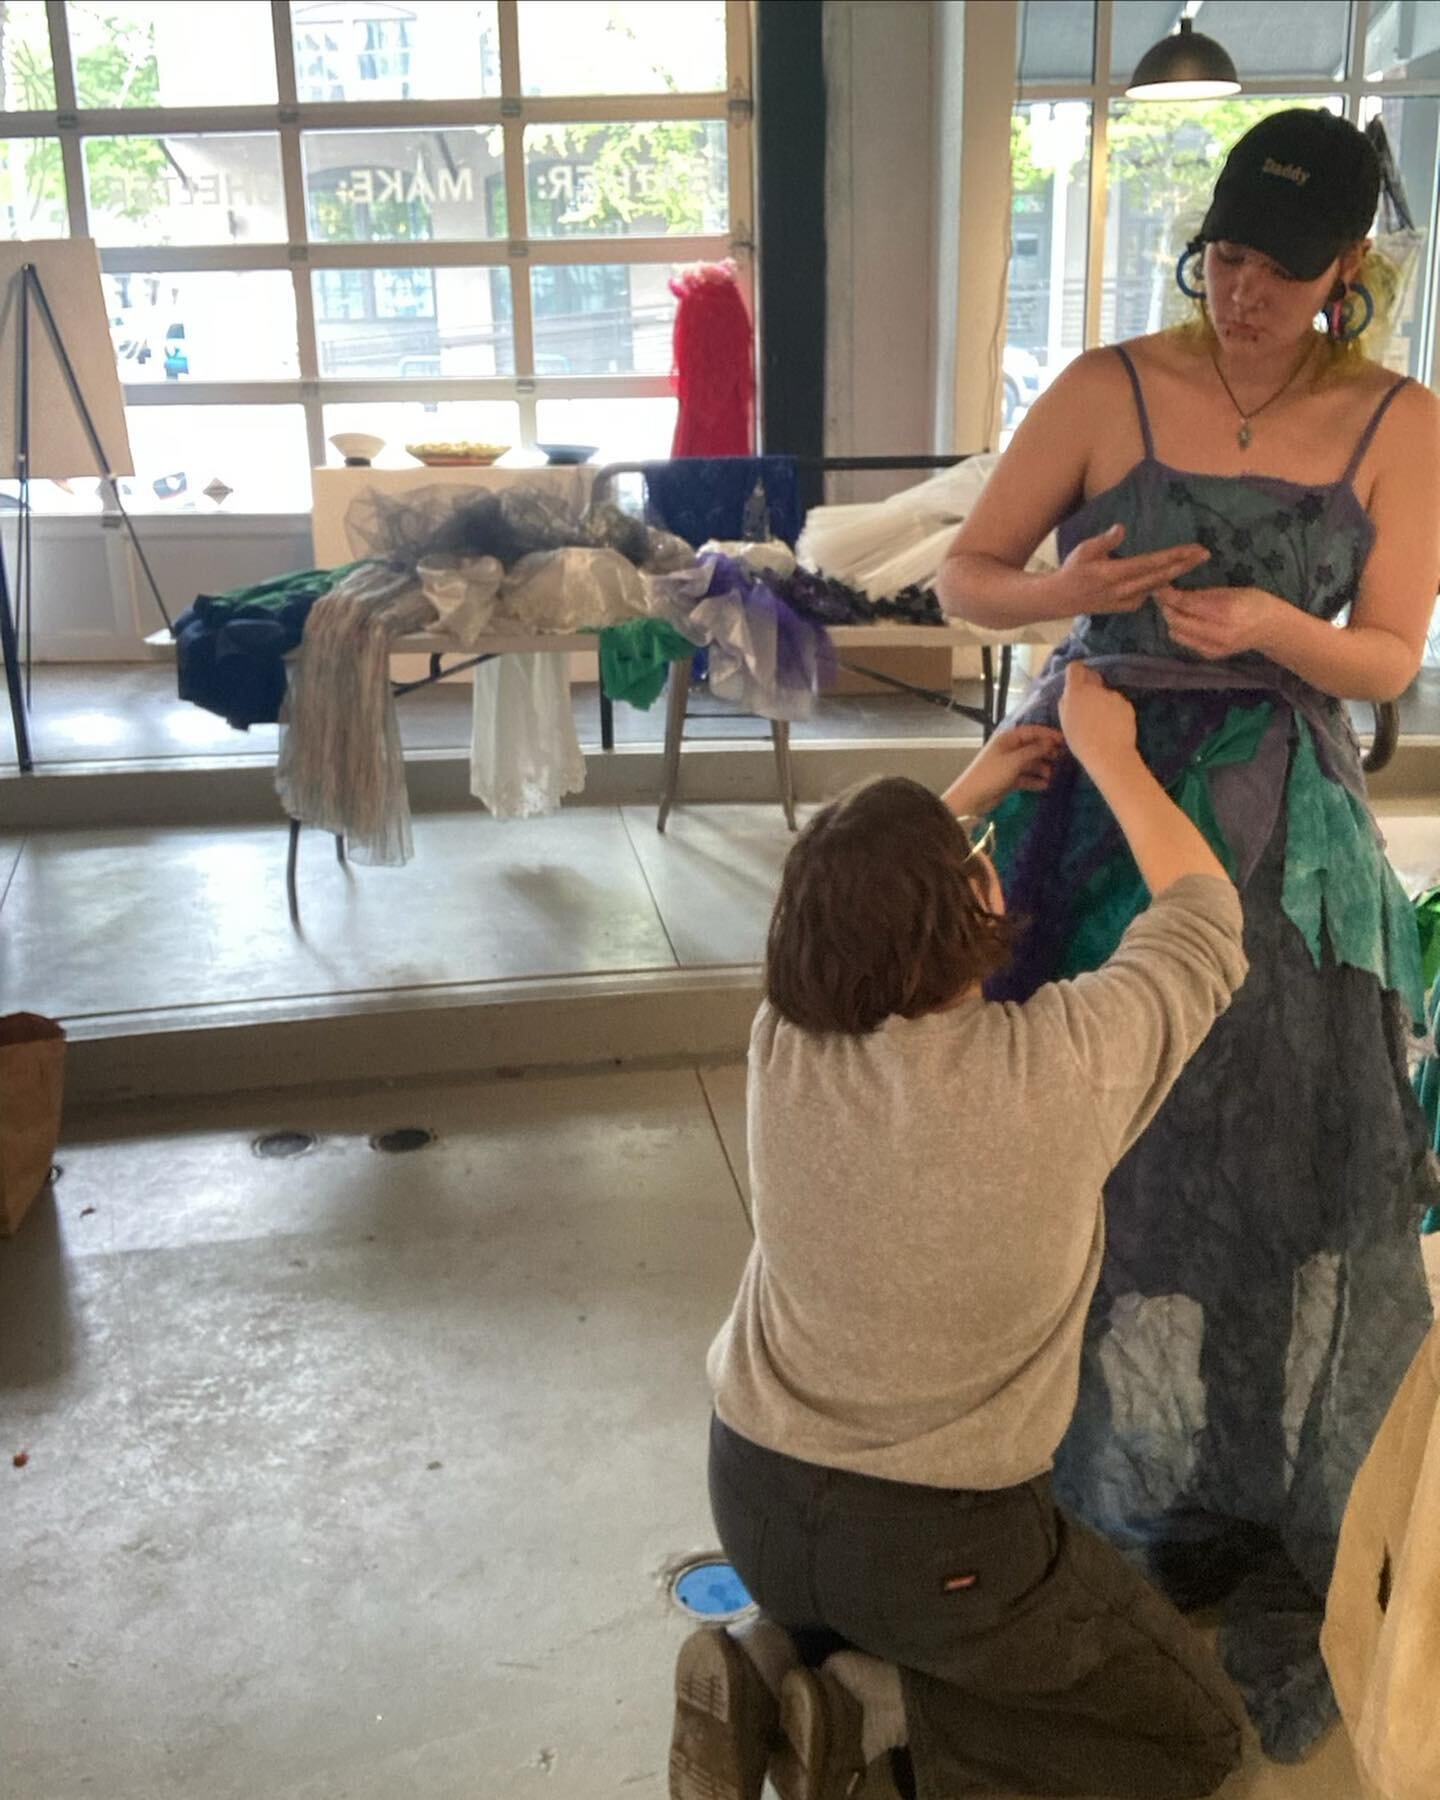 Working with Blue on the QA village/GMS fashion show. Coming to Pride NW this June. Picture by @smilesofplanetearth @gathermakeshelter #fashion #pnwartist #houselessartist #art #fashionshow #queerartist